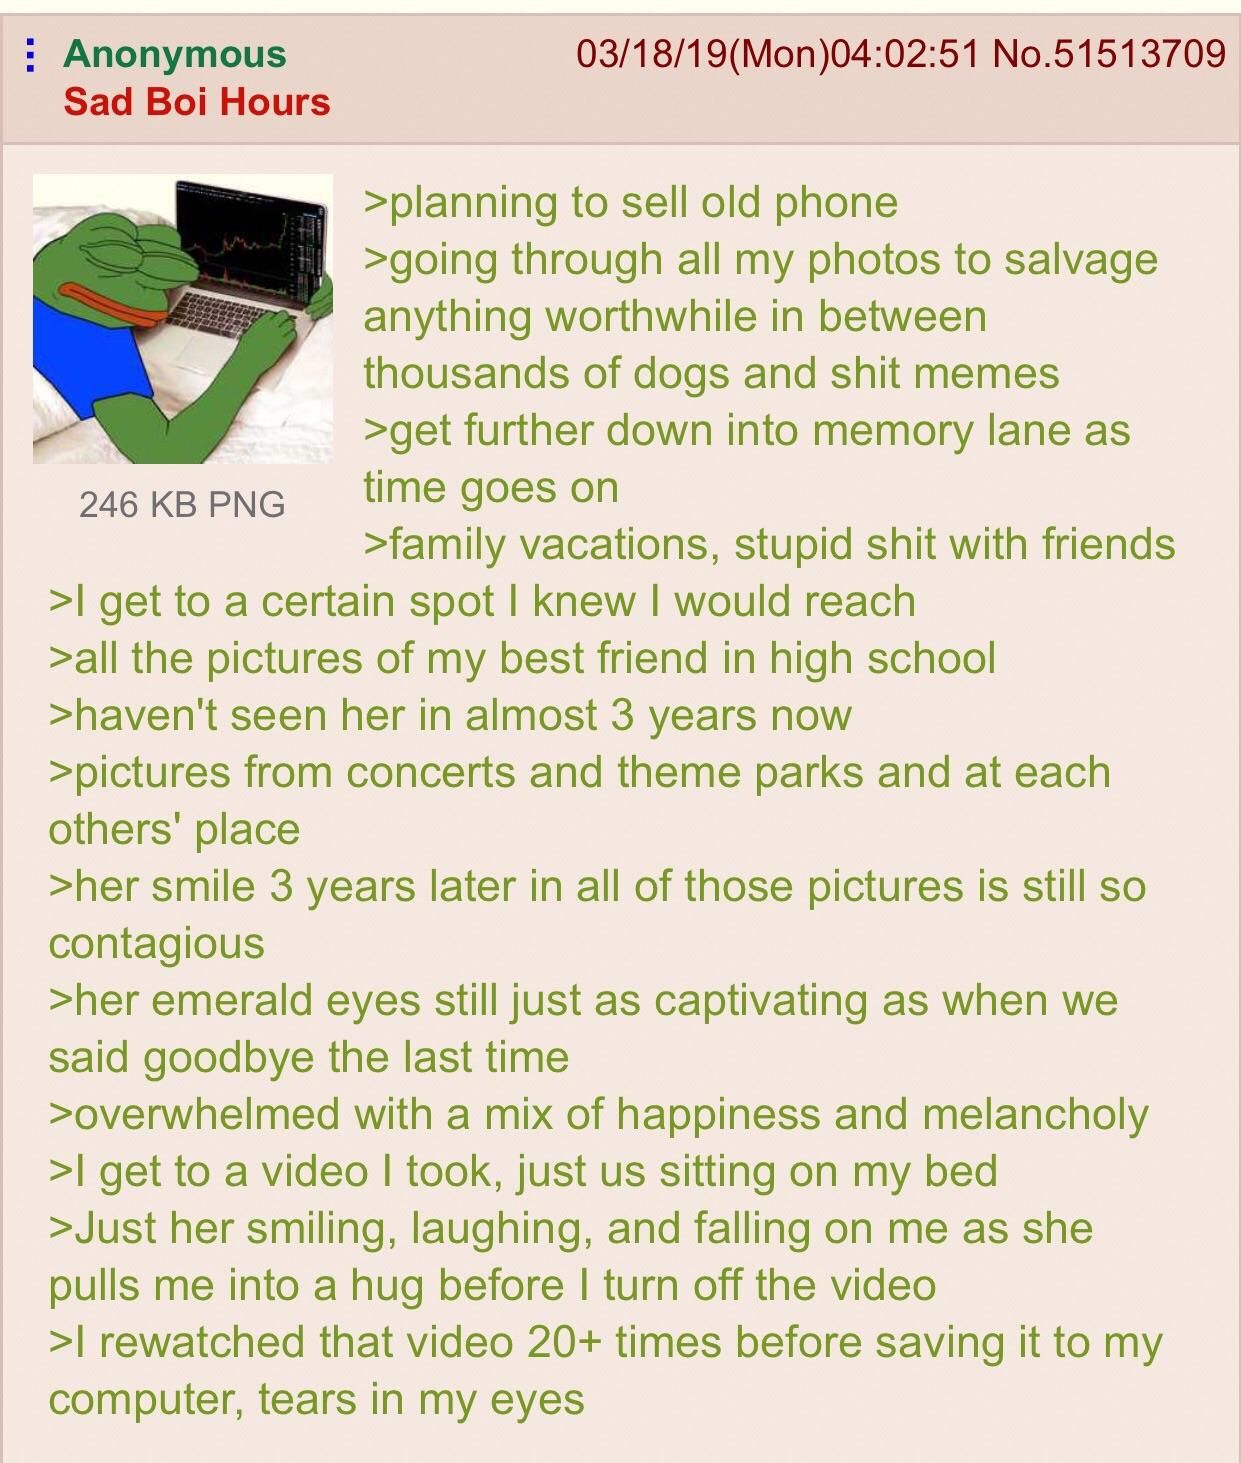 Anon and his memories